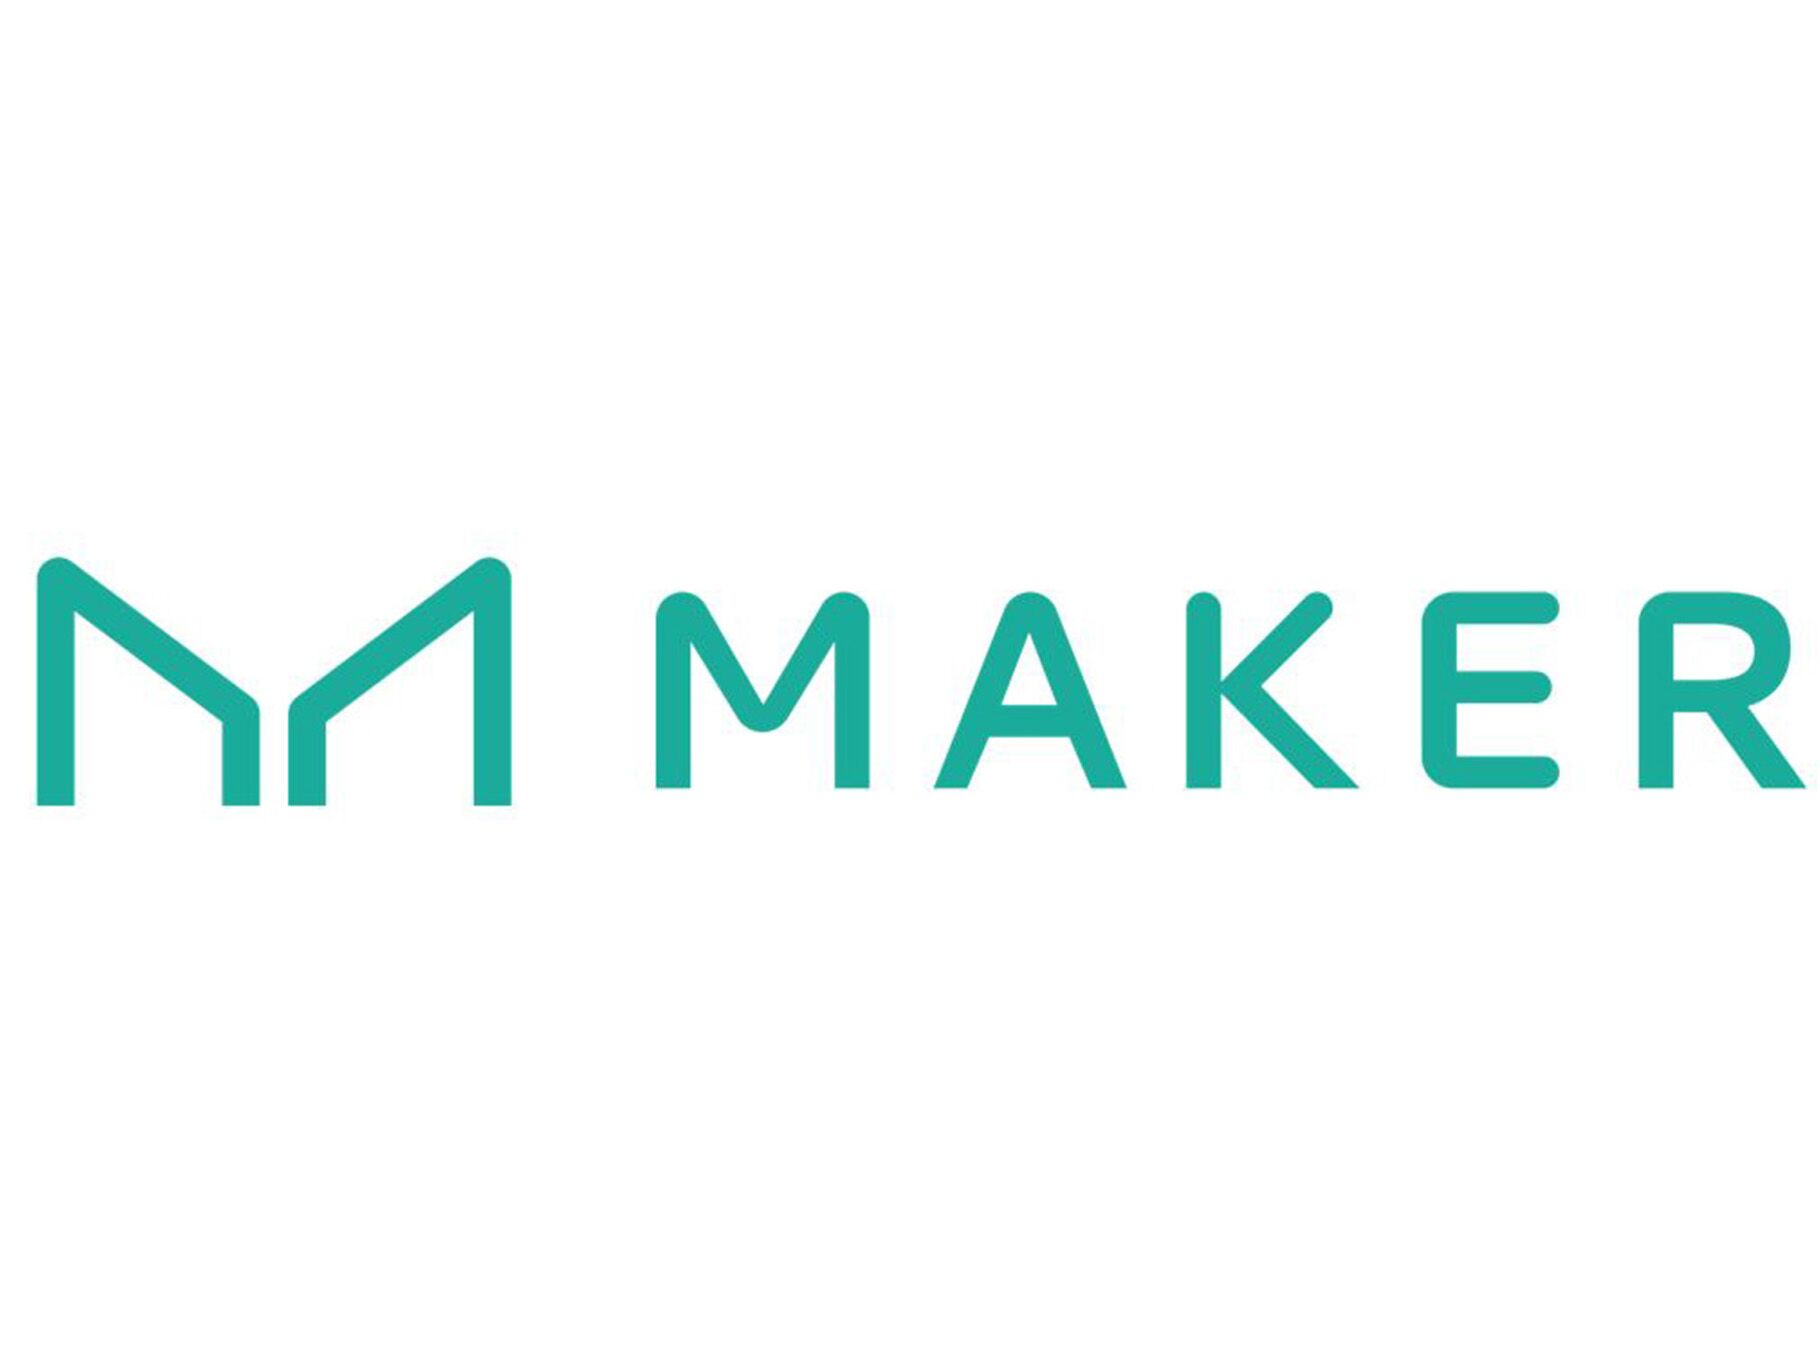 MakerDAO Enacts Interim Fee Changes in Response to Market Fluctuations